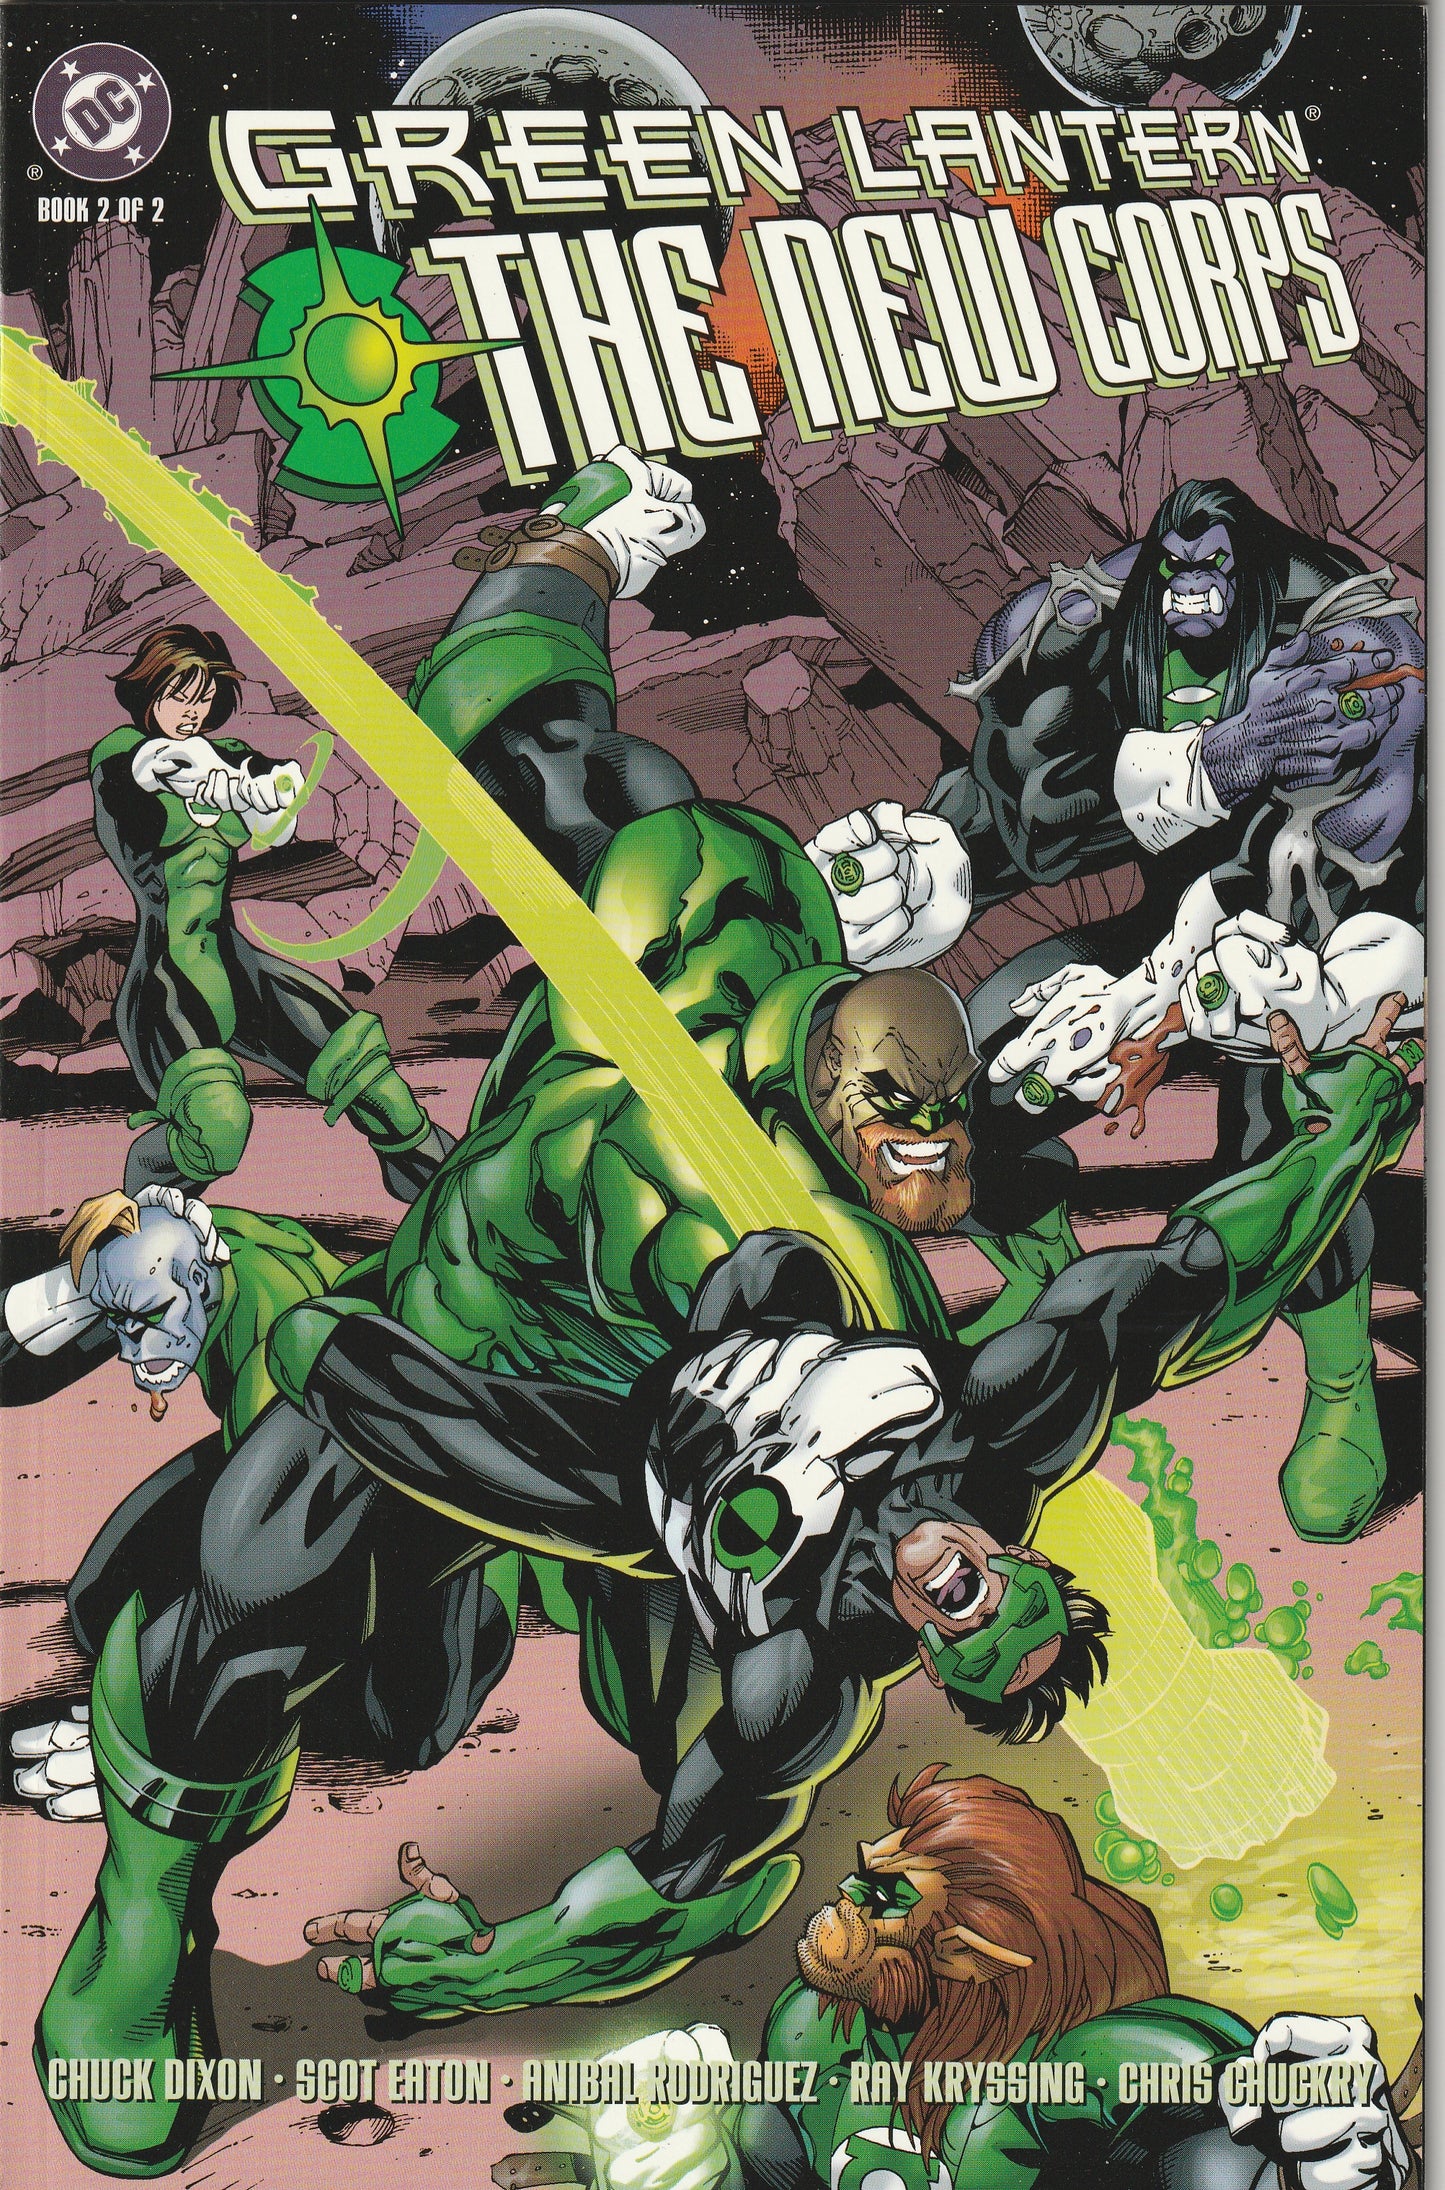 Green Lantern: The New Corps (1999) - Complete 2 issue mini-series